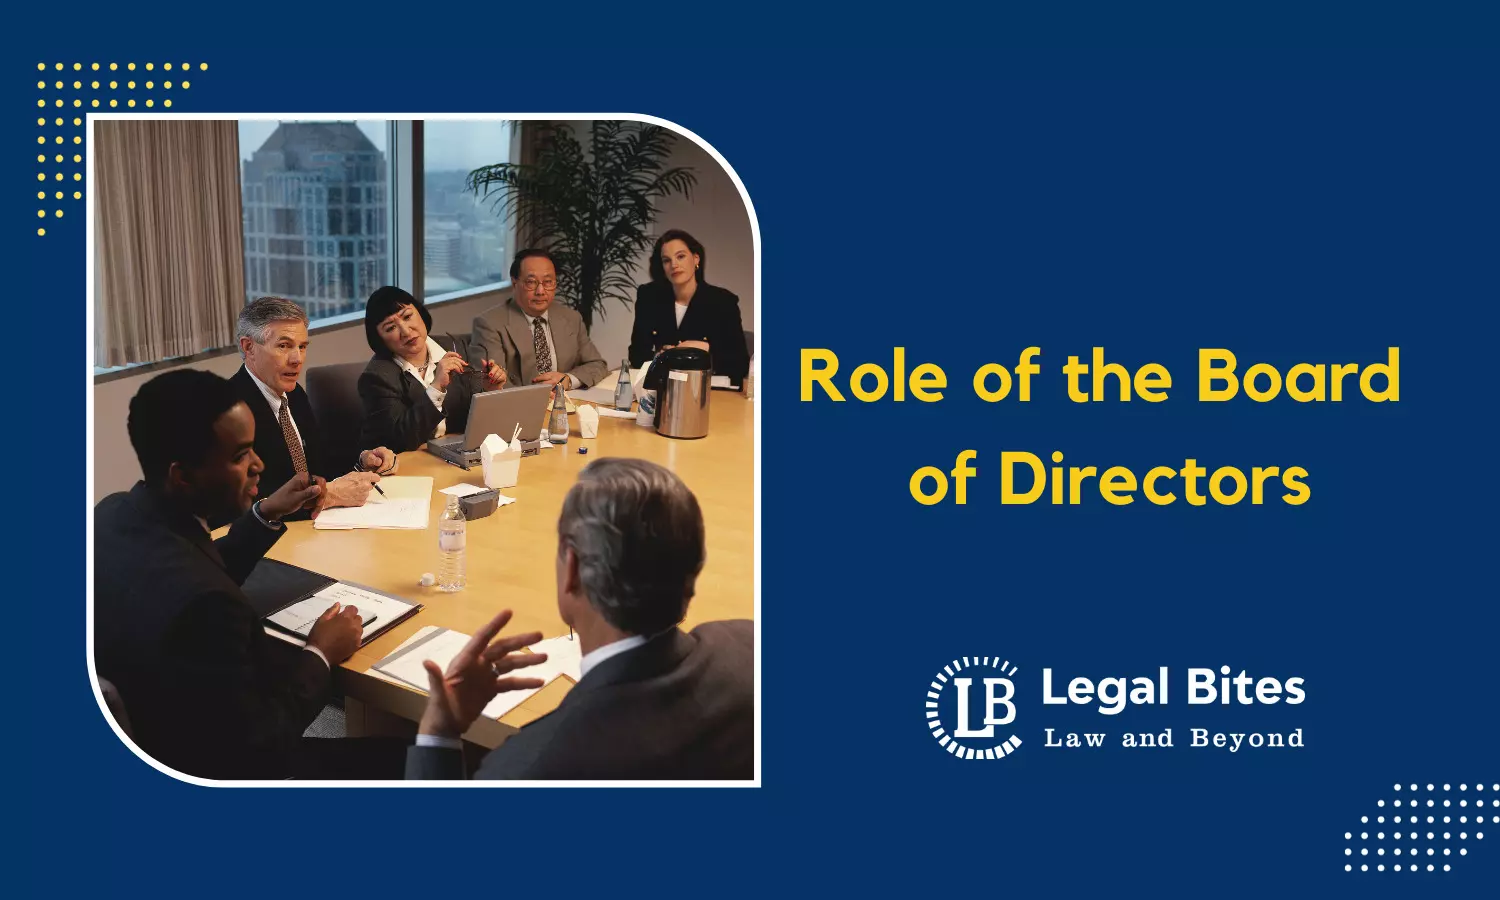 Role of the Board of Directors in Corporate Governance